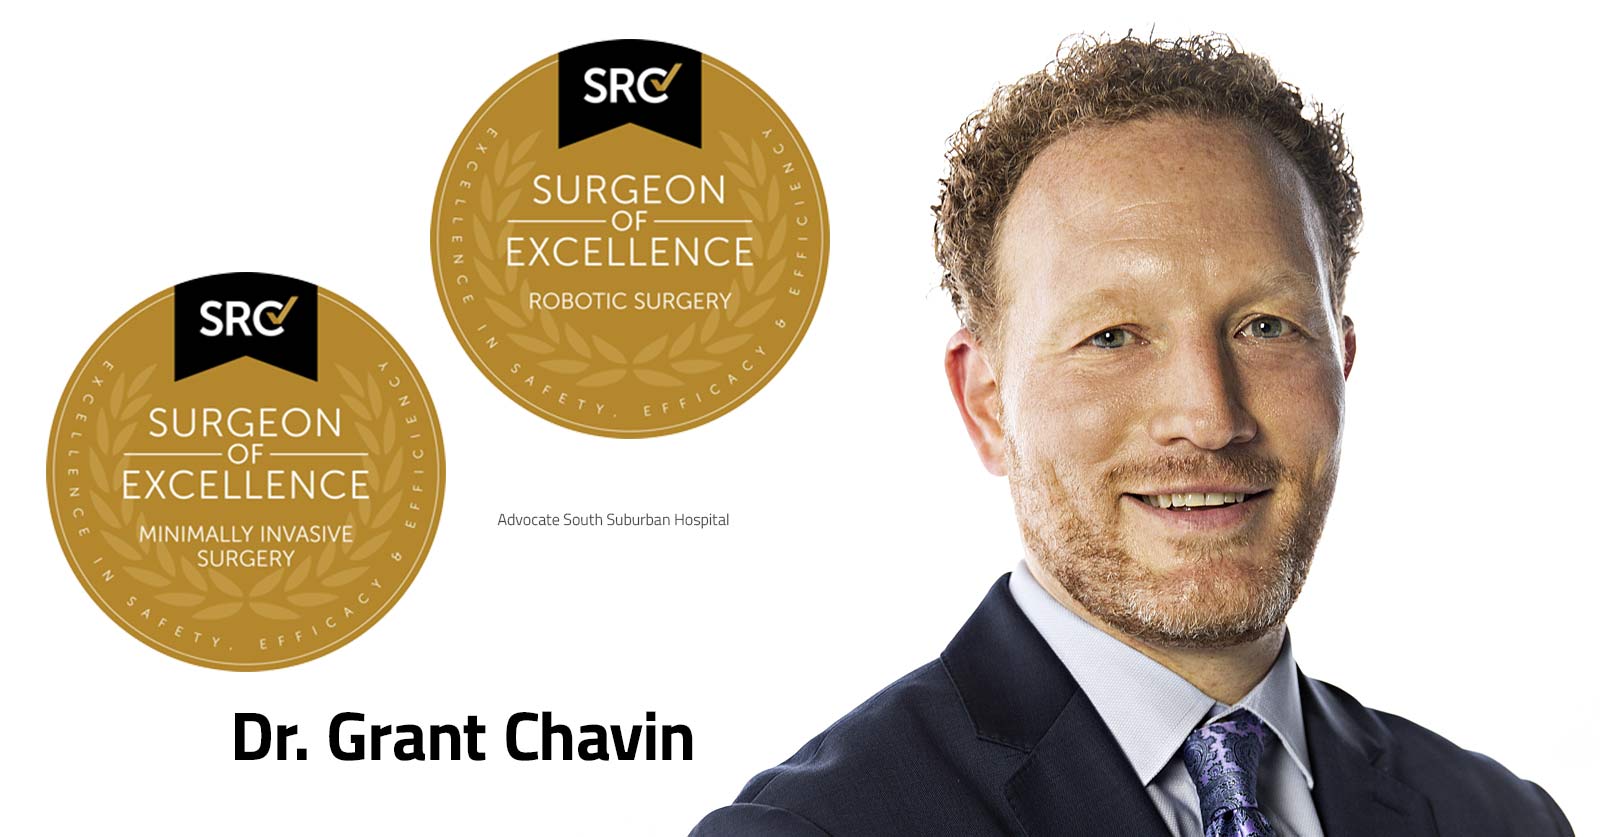 Surgeon of Excellence - Grant Chavin, MD